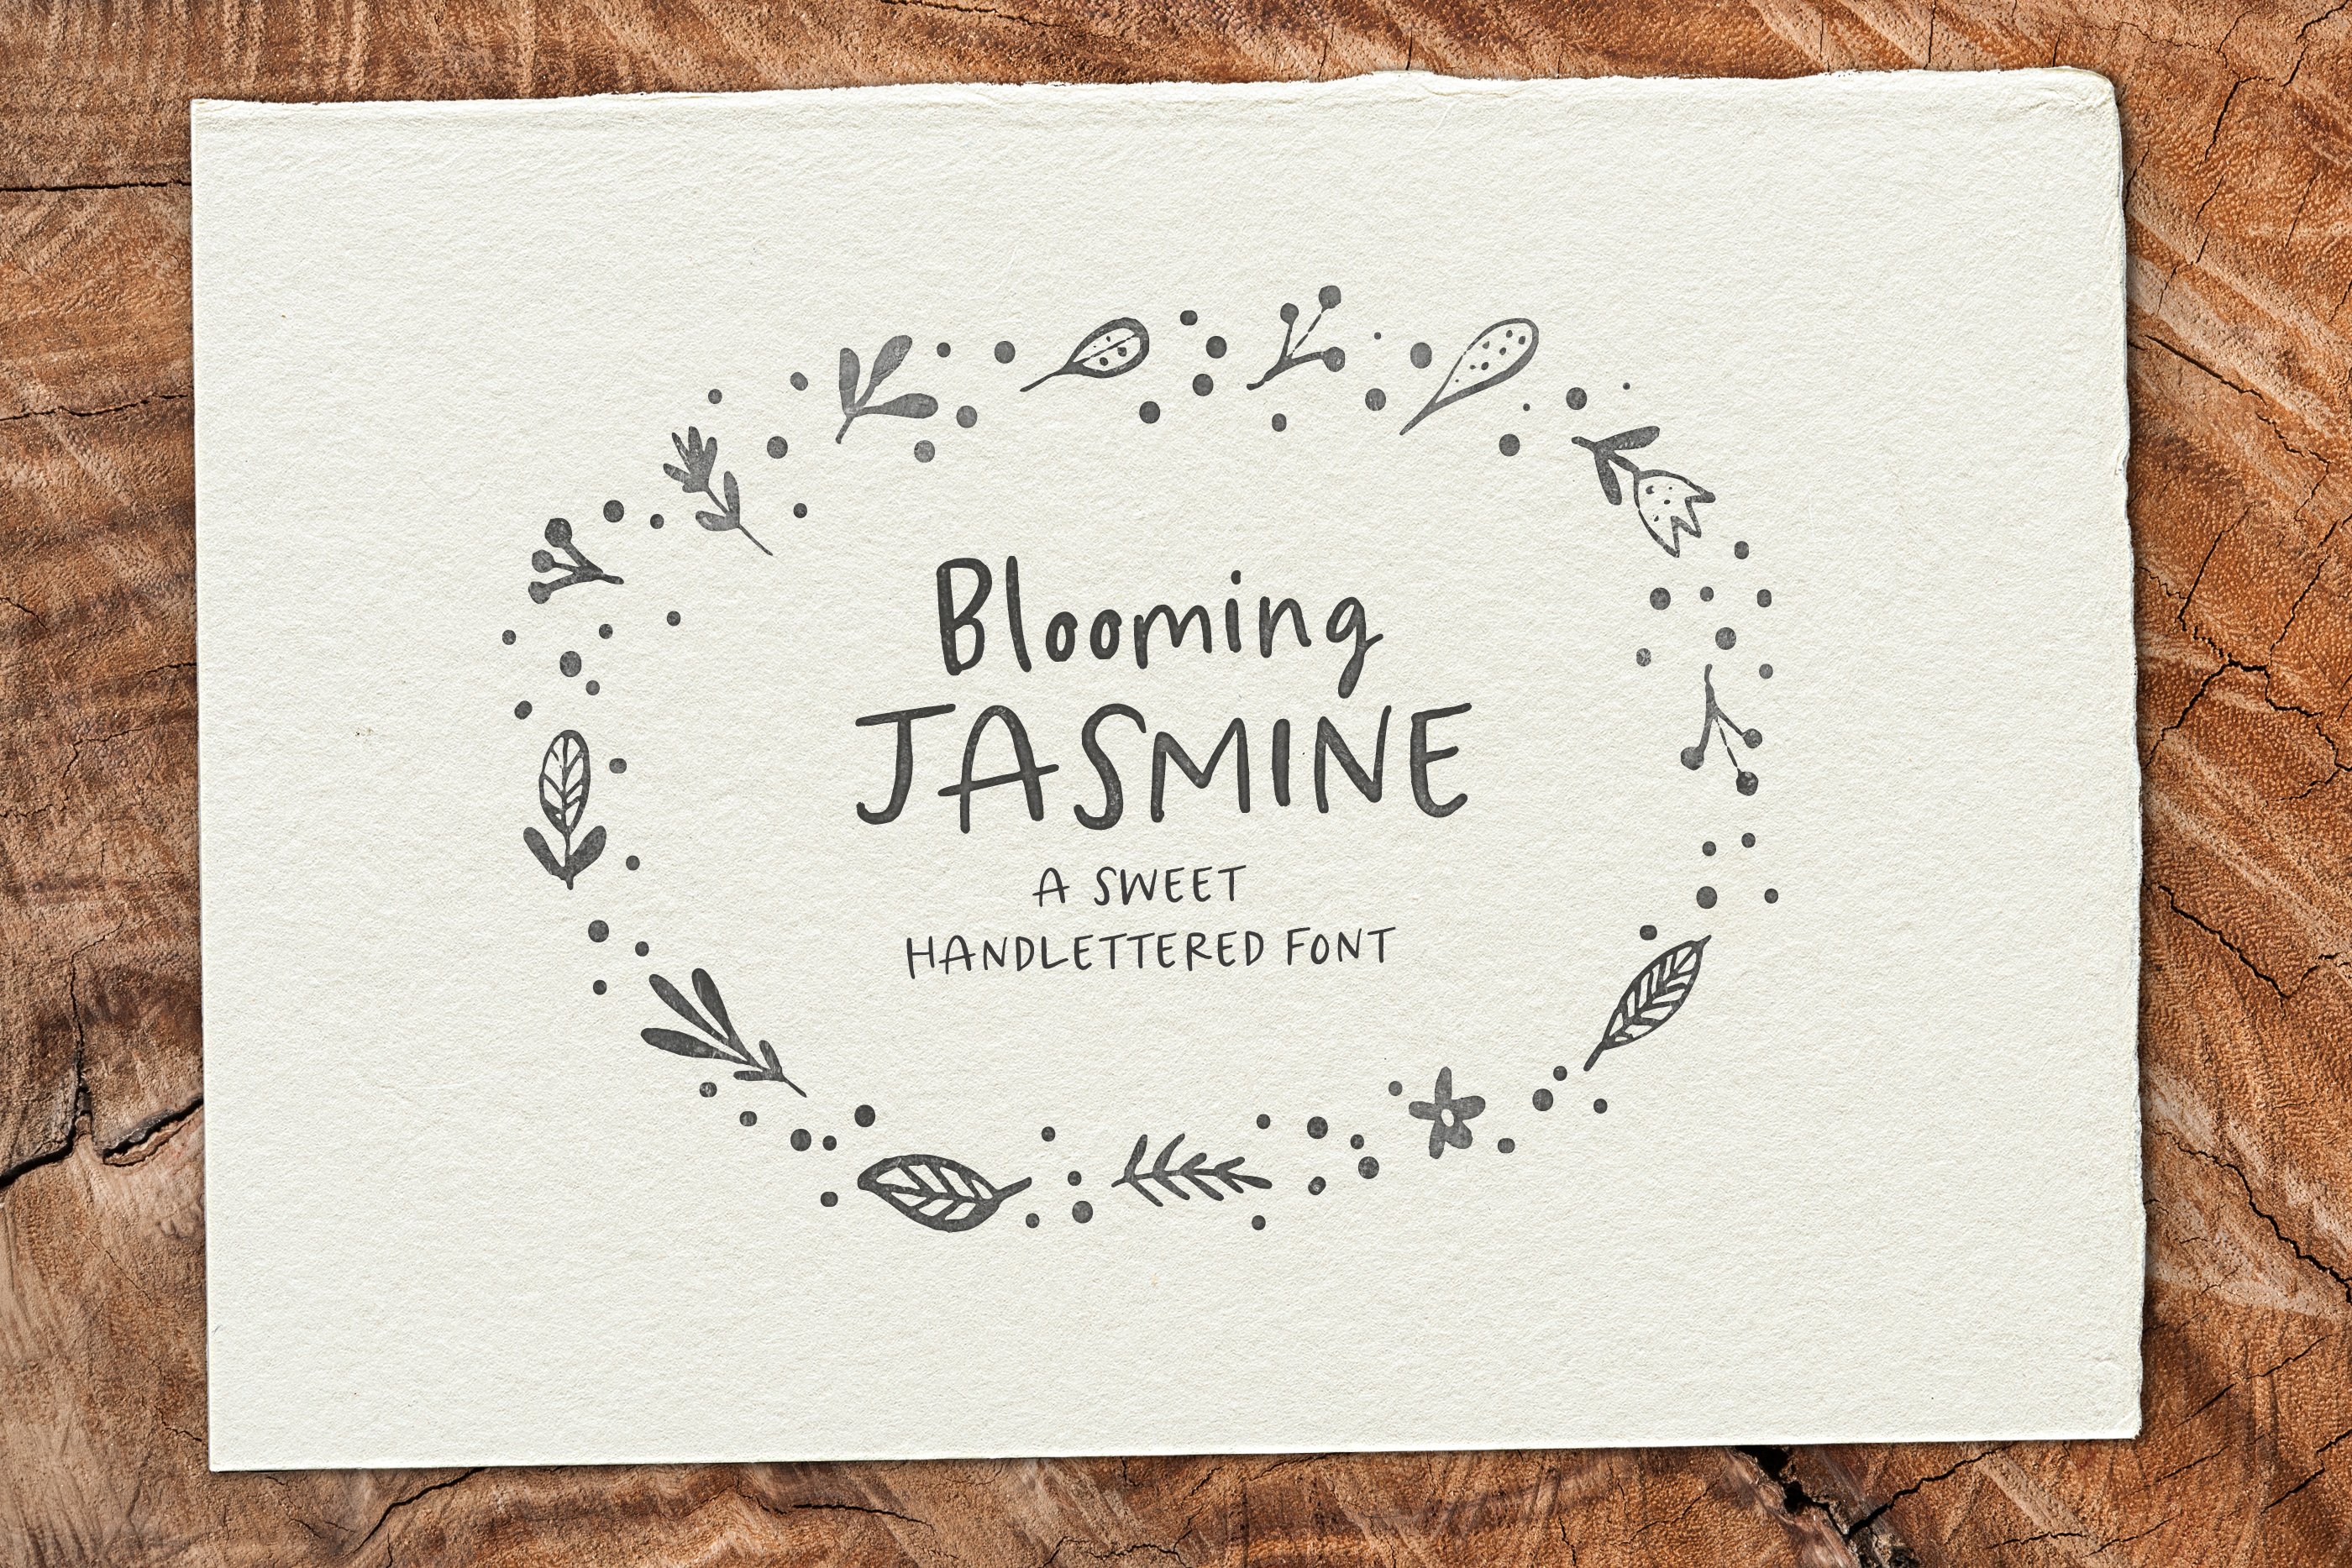 Blooming Jasmine Font (Font) by Nicky Laatz